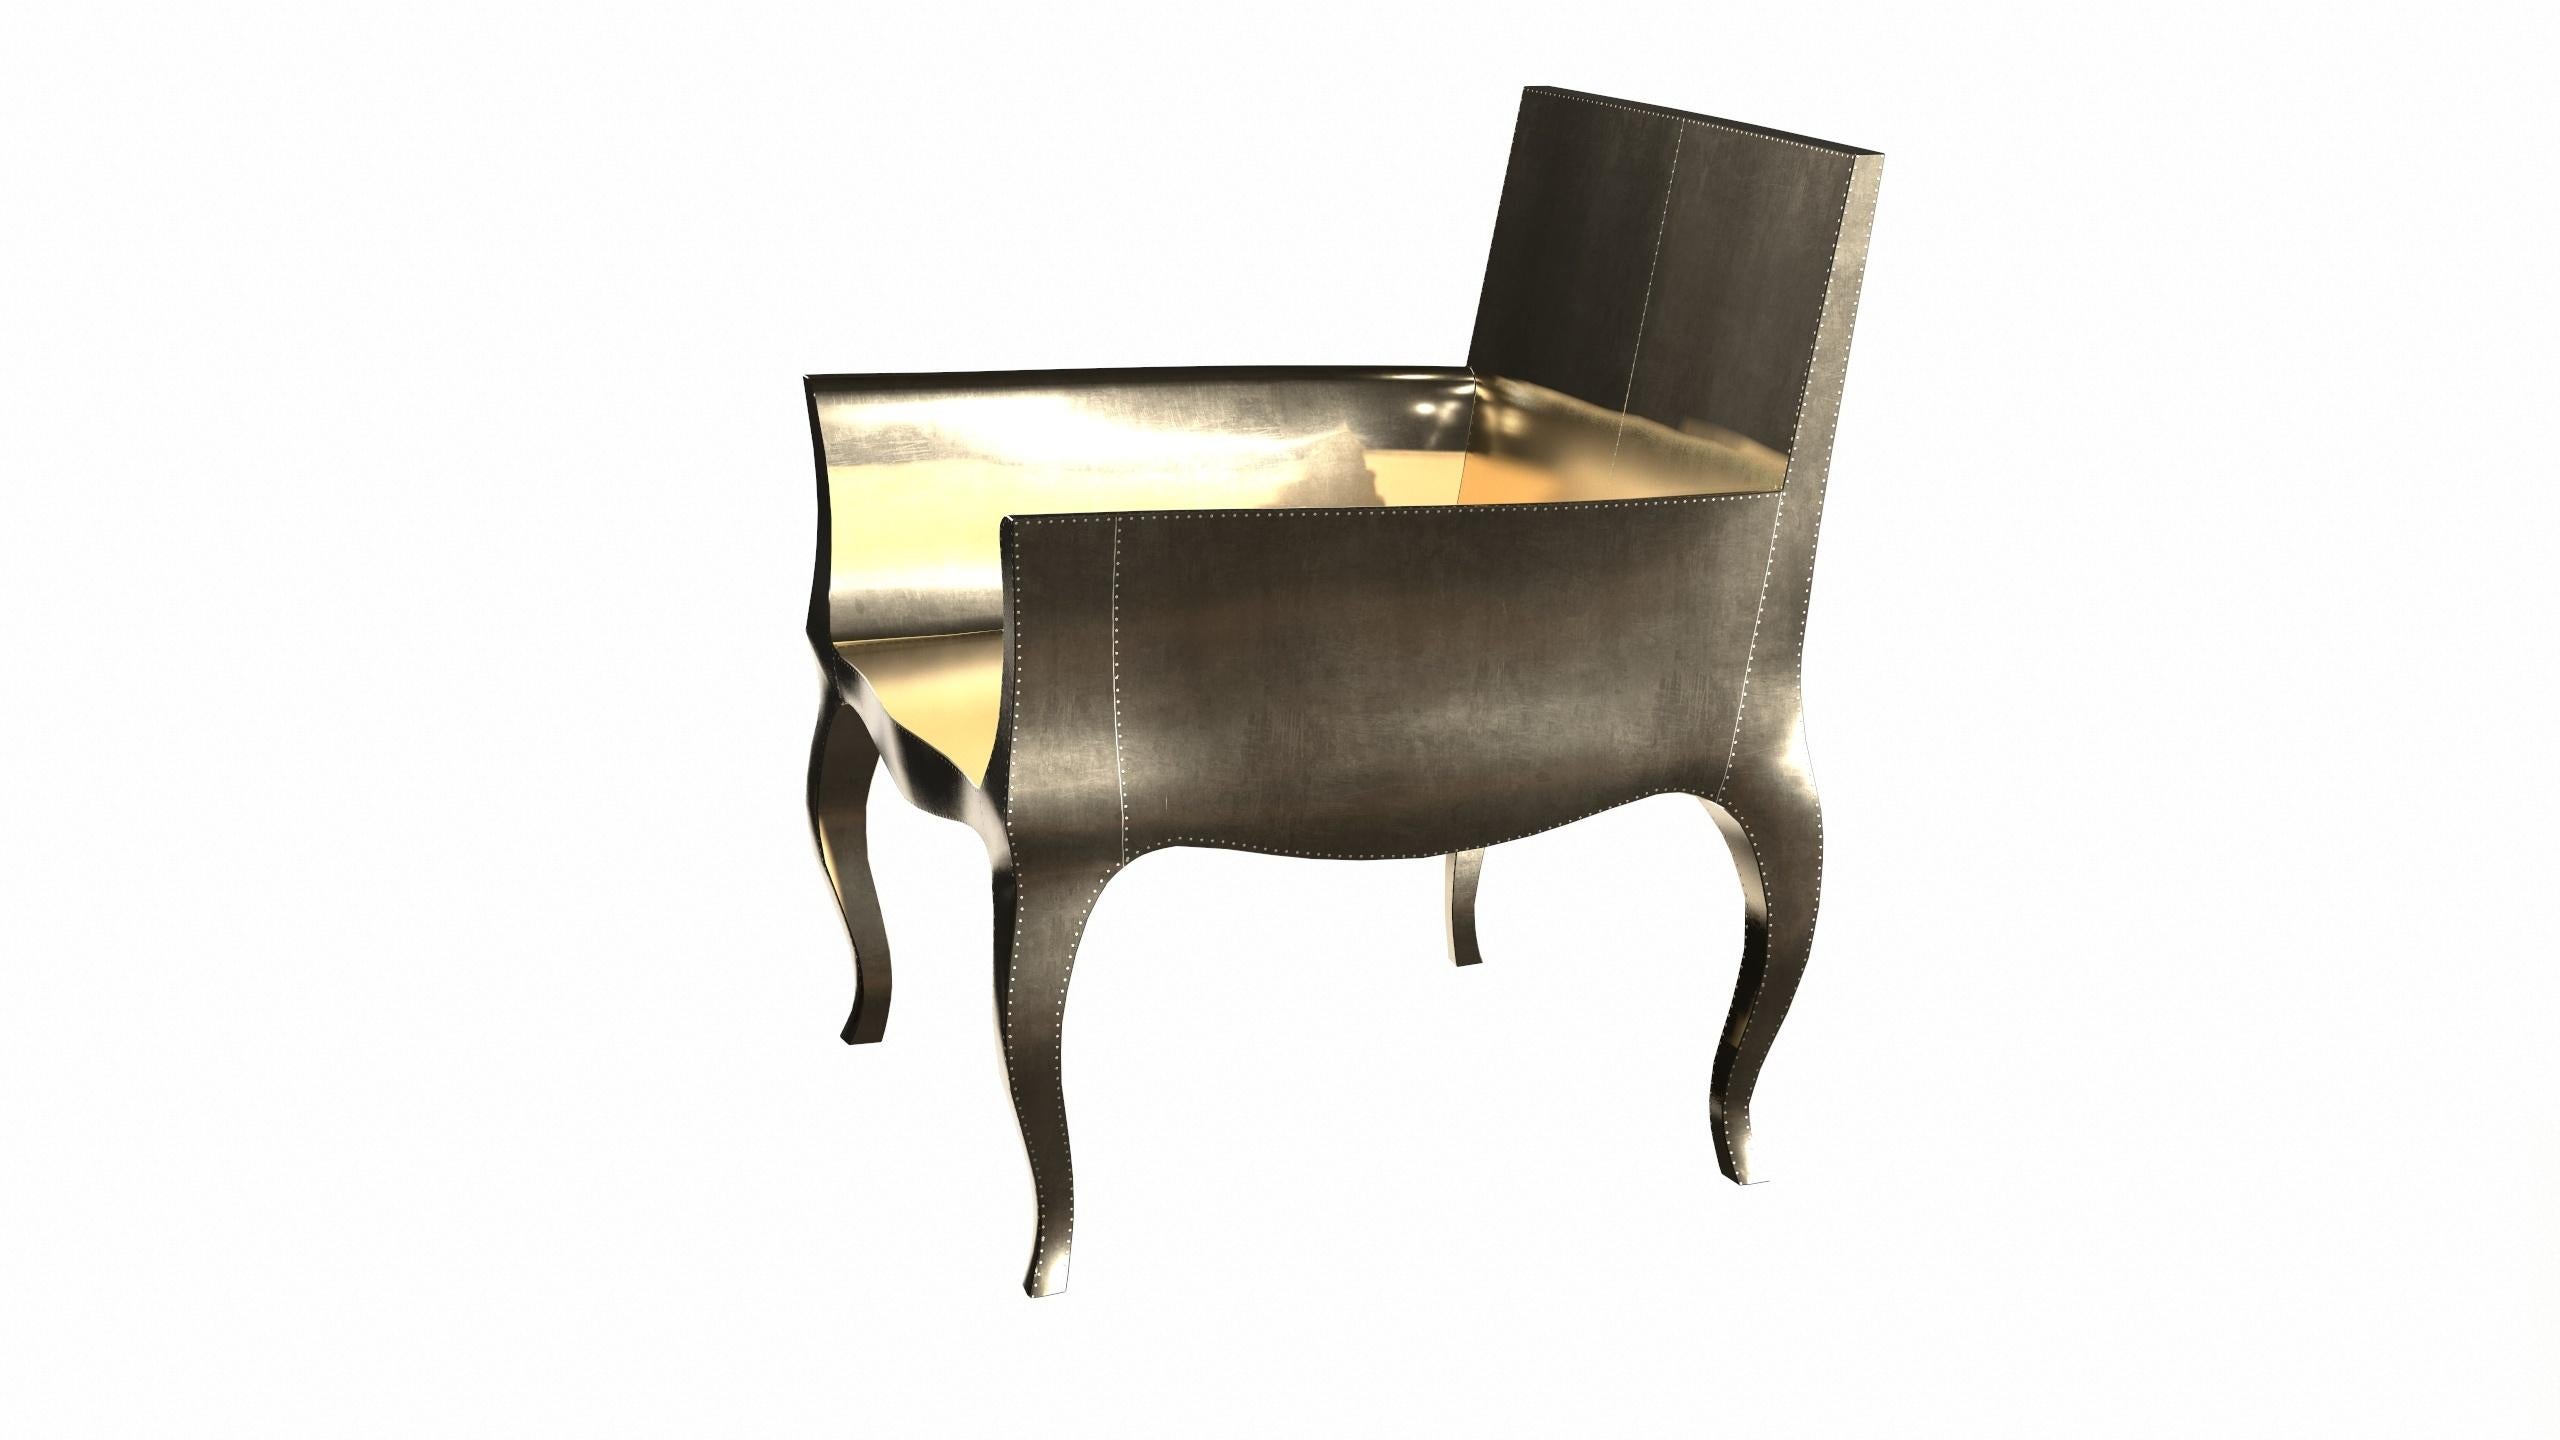 Metalwork Art Deco Style Chairs in Smooth Brass by Paul Mathieu for S. Odegard For Sale